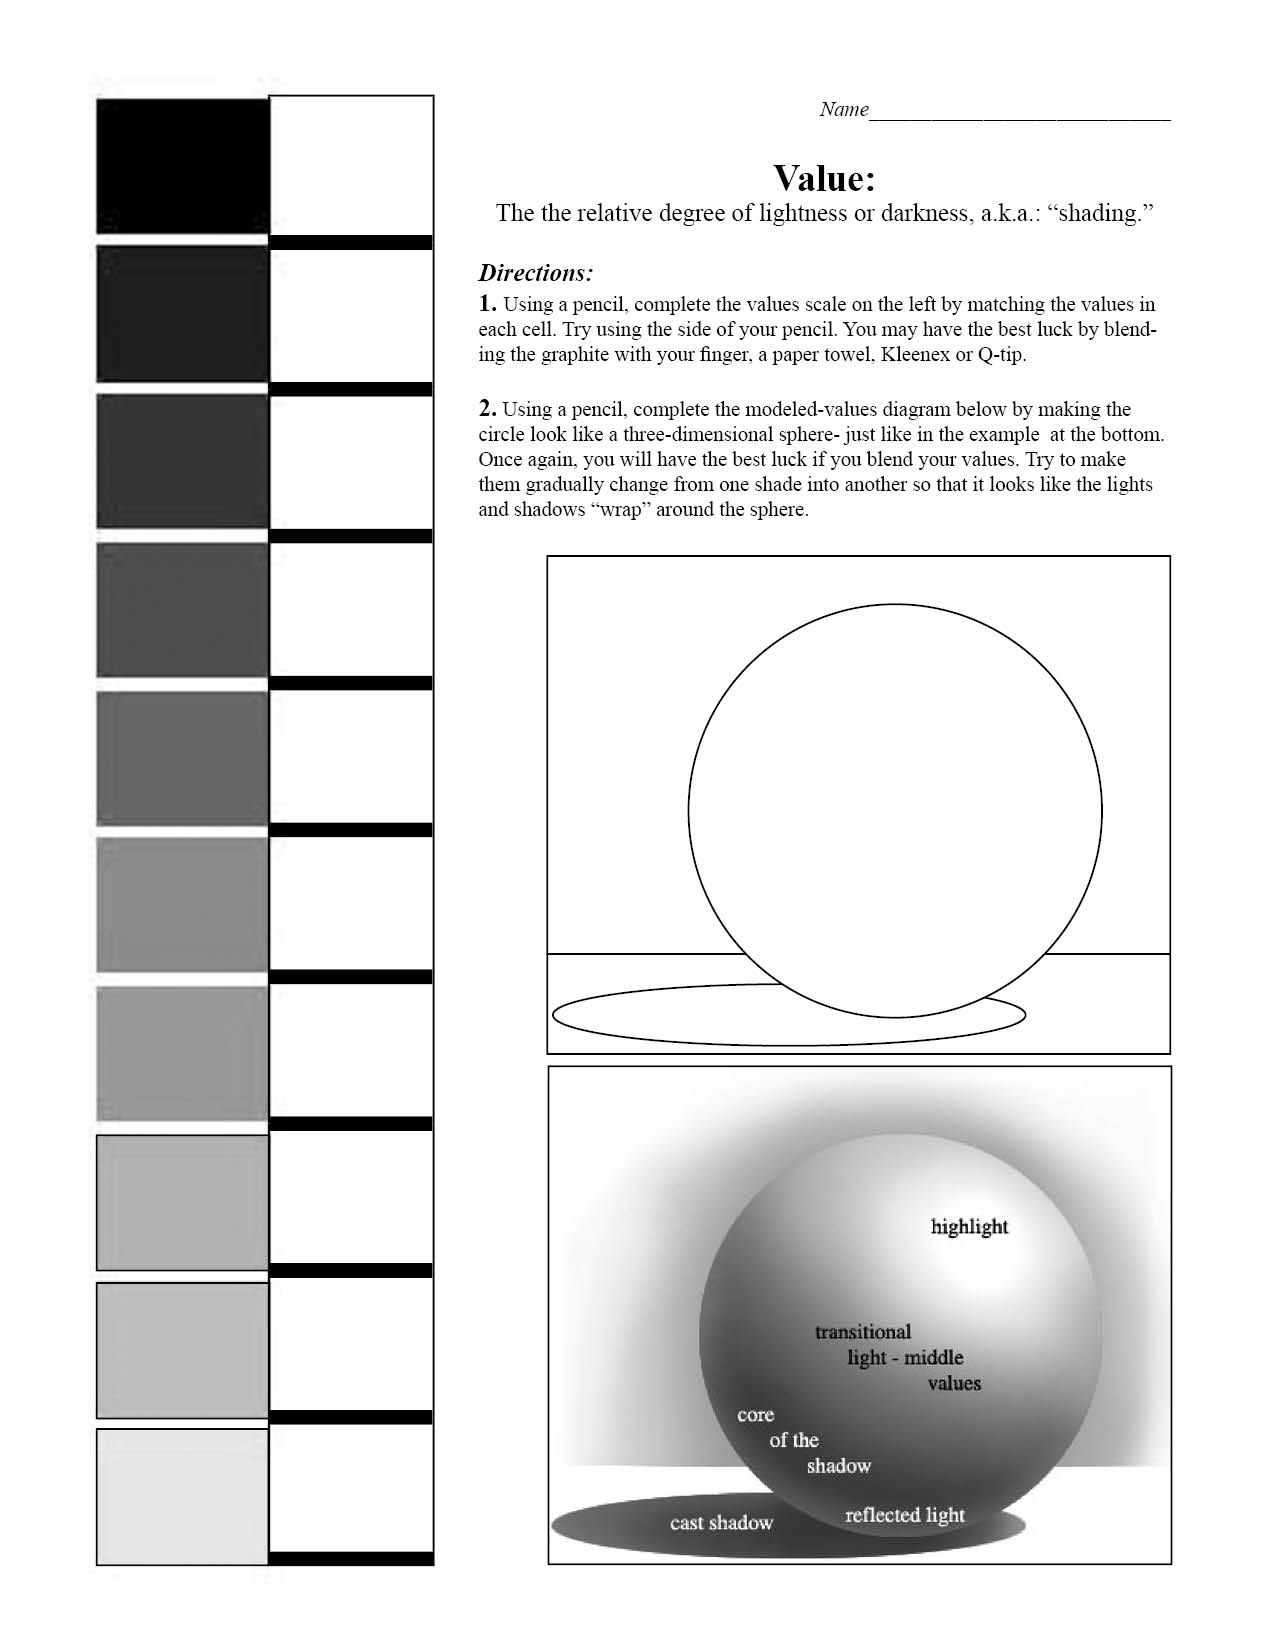 Story Elements Worksheet Pdf as Well as Value Scale and Sphere Worksheet 7th Grade Art Blending Value